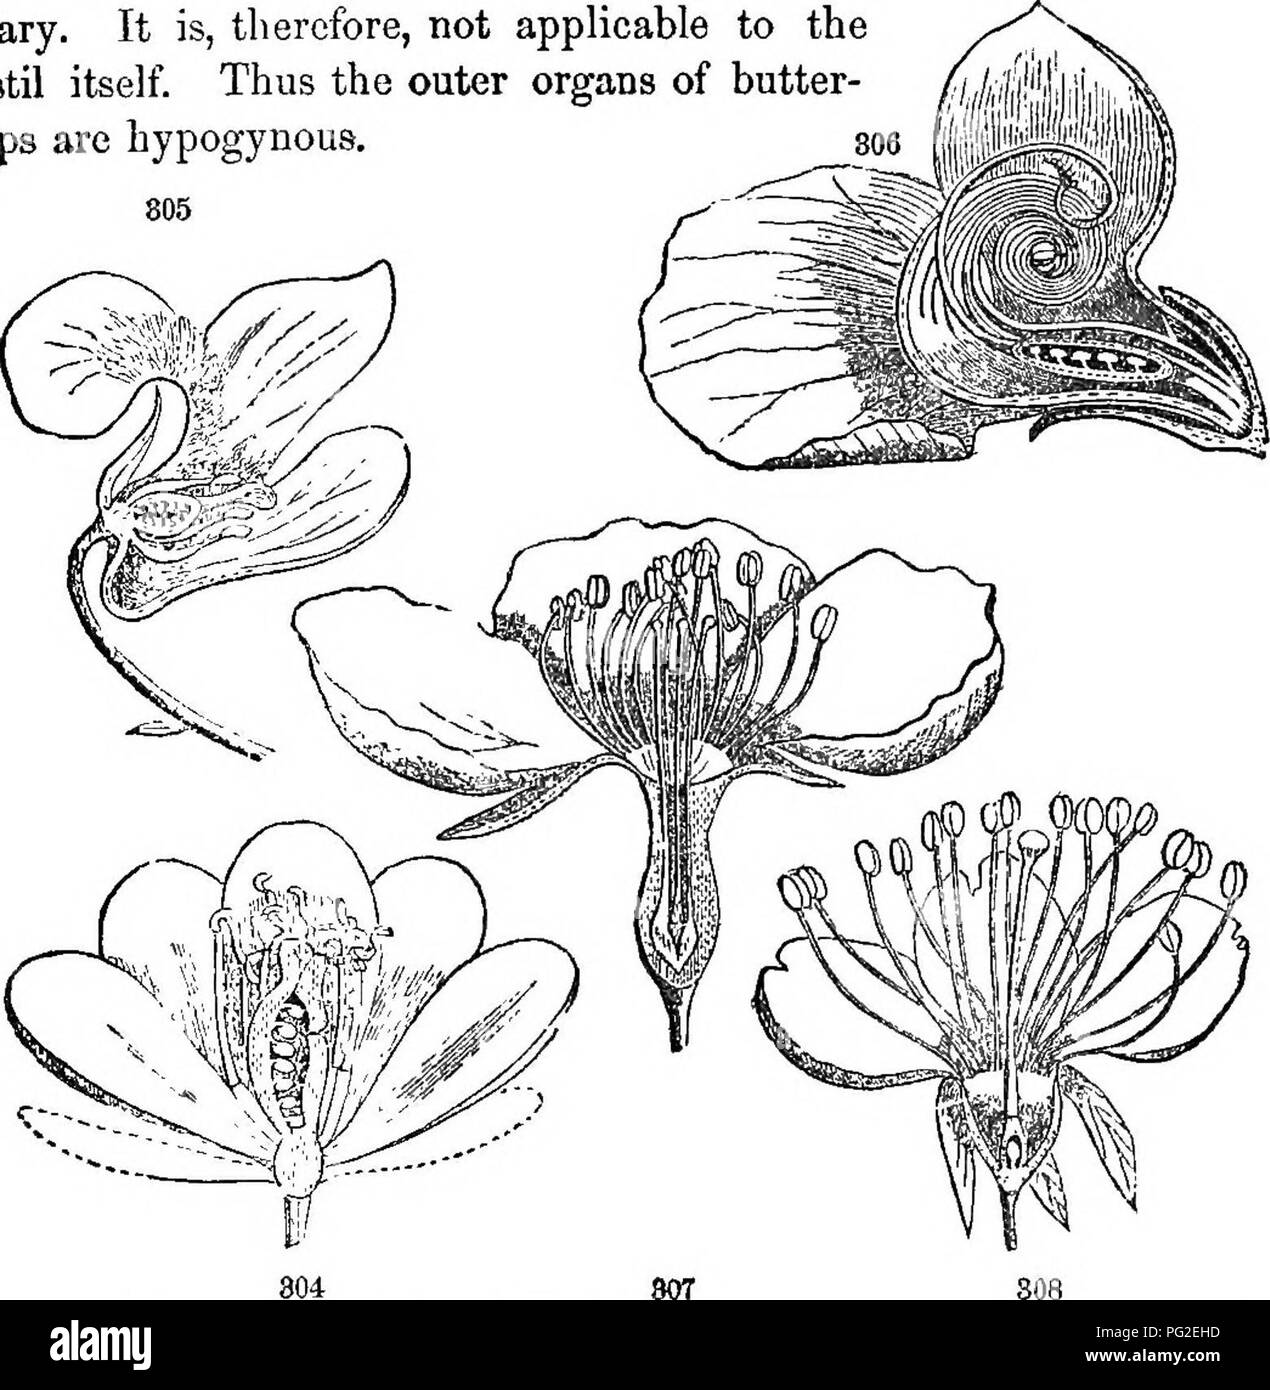 . Class-book of botany : being outlines of the structure, physiology, and classification of plants ; with a flora of the United States and Canada . Botany; Botany; Botany. 94 THE FLORAL ENVELOPS, OB PERIANTH. 463. Hypogynous (vttu), under, yvvrj, pistil) is an adjective term in frequent use, denoting that tlie organs are inserted into the receptacle under or at the base of the free pistil or ovary. It is, therefore, not applicable to the pistil itself. Thus the outer organs of butter- /-/ajji cups are hypogynous. 806 [||iii|||. Section of flowers. 304, JetFersonIn dlphylb, hypogjnoua. 805, Vio Stock Photo